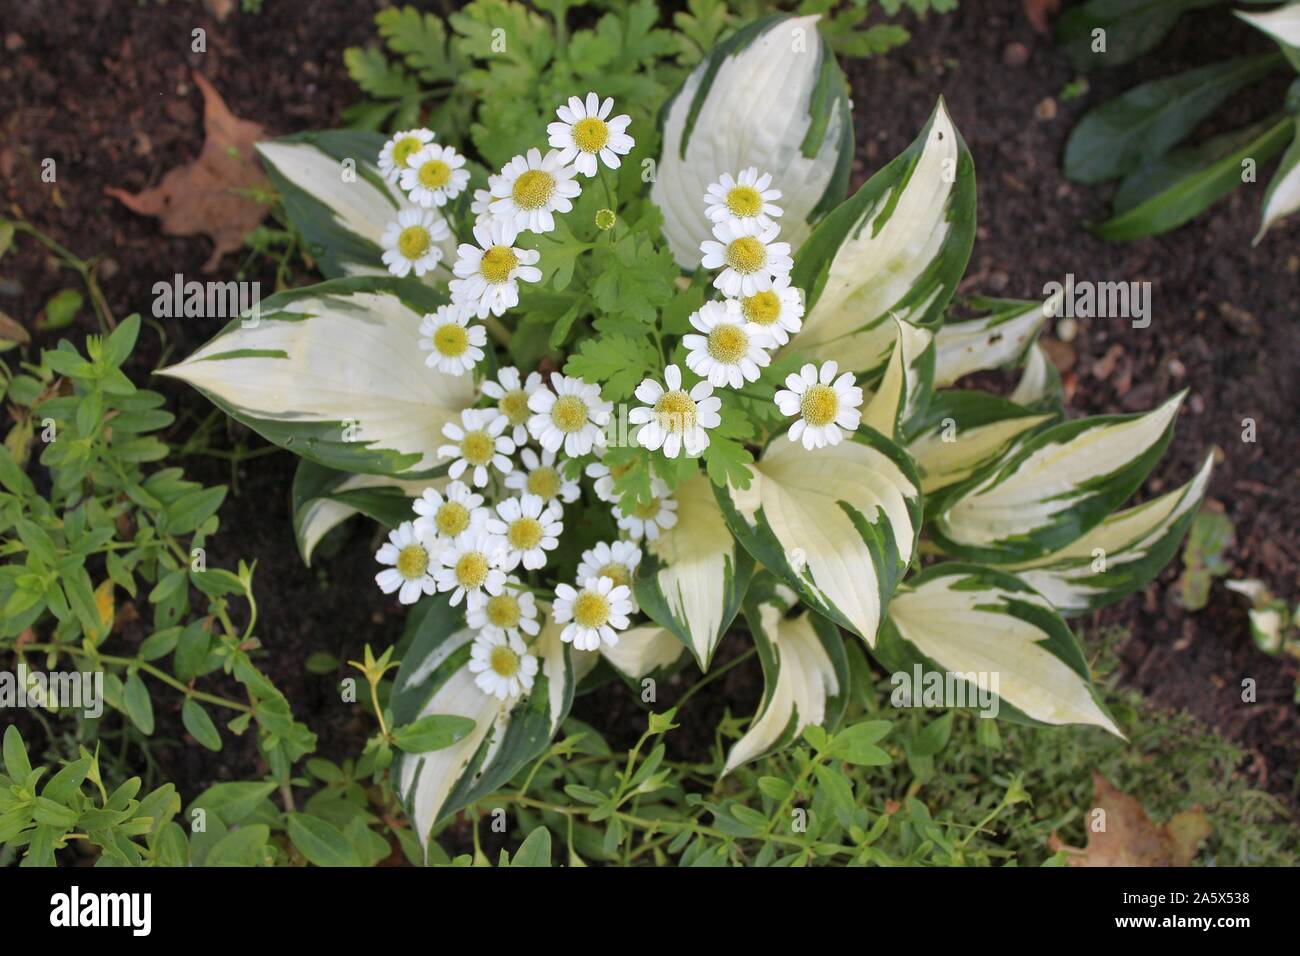 Feverfew Flowers Bloom Among A Variegated Hosta Plant Stock Photo